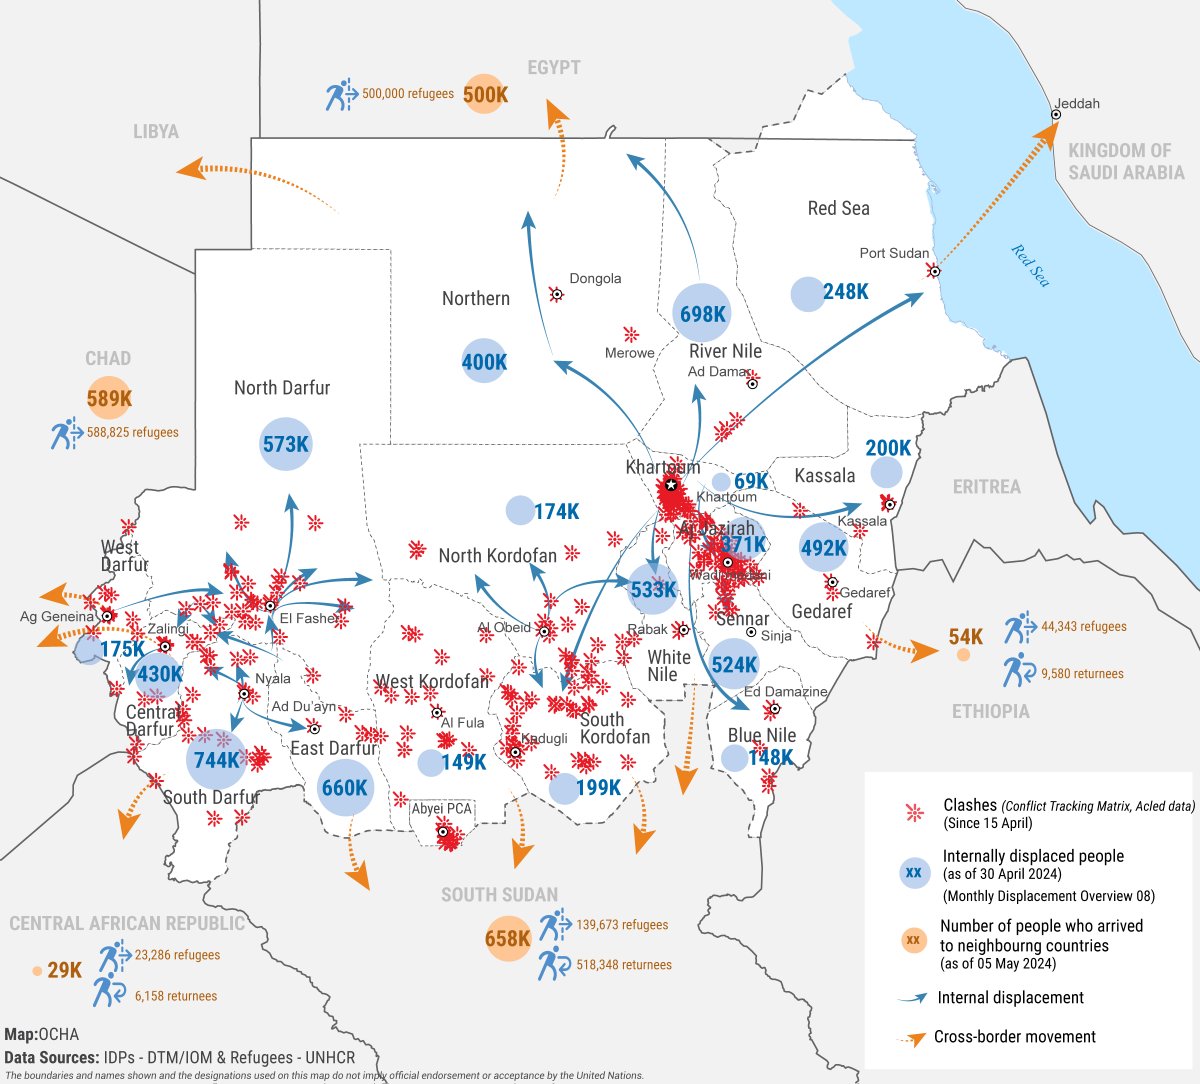 #Sudan Humanitarian update Over 8.8M people have fled their homes. Food access is the top priority for IDPs. Rising hunger and malnutrition are expected to increase mortality. Since 15 April, 15,550 fatalities, per @ACLEDINFO. 🔗reliefweb.int/report/sudan/s…